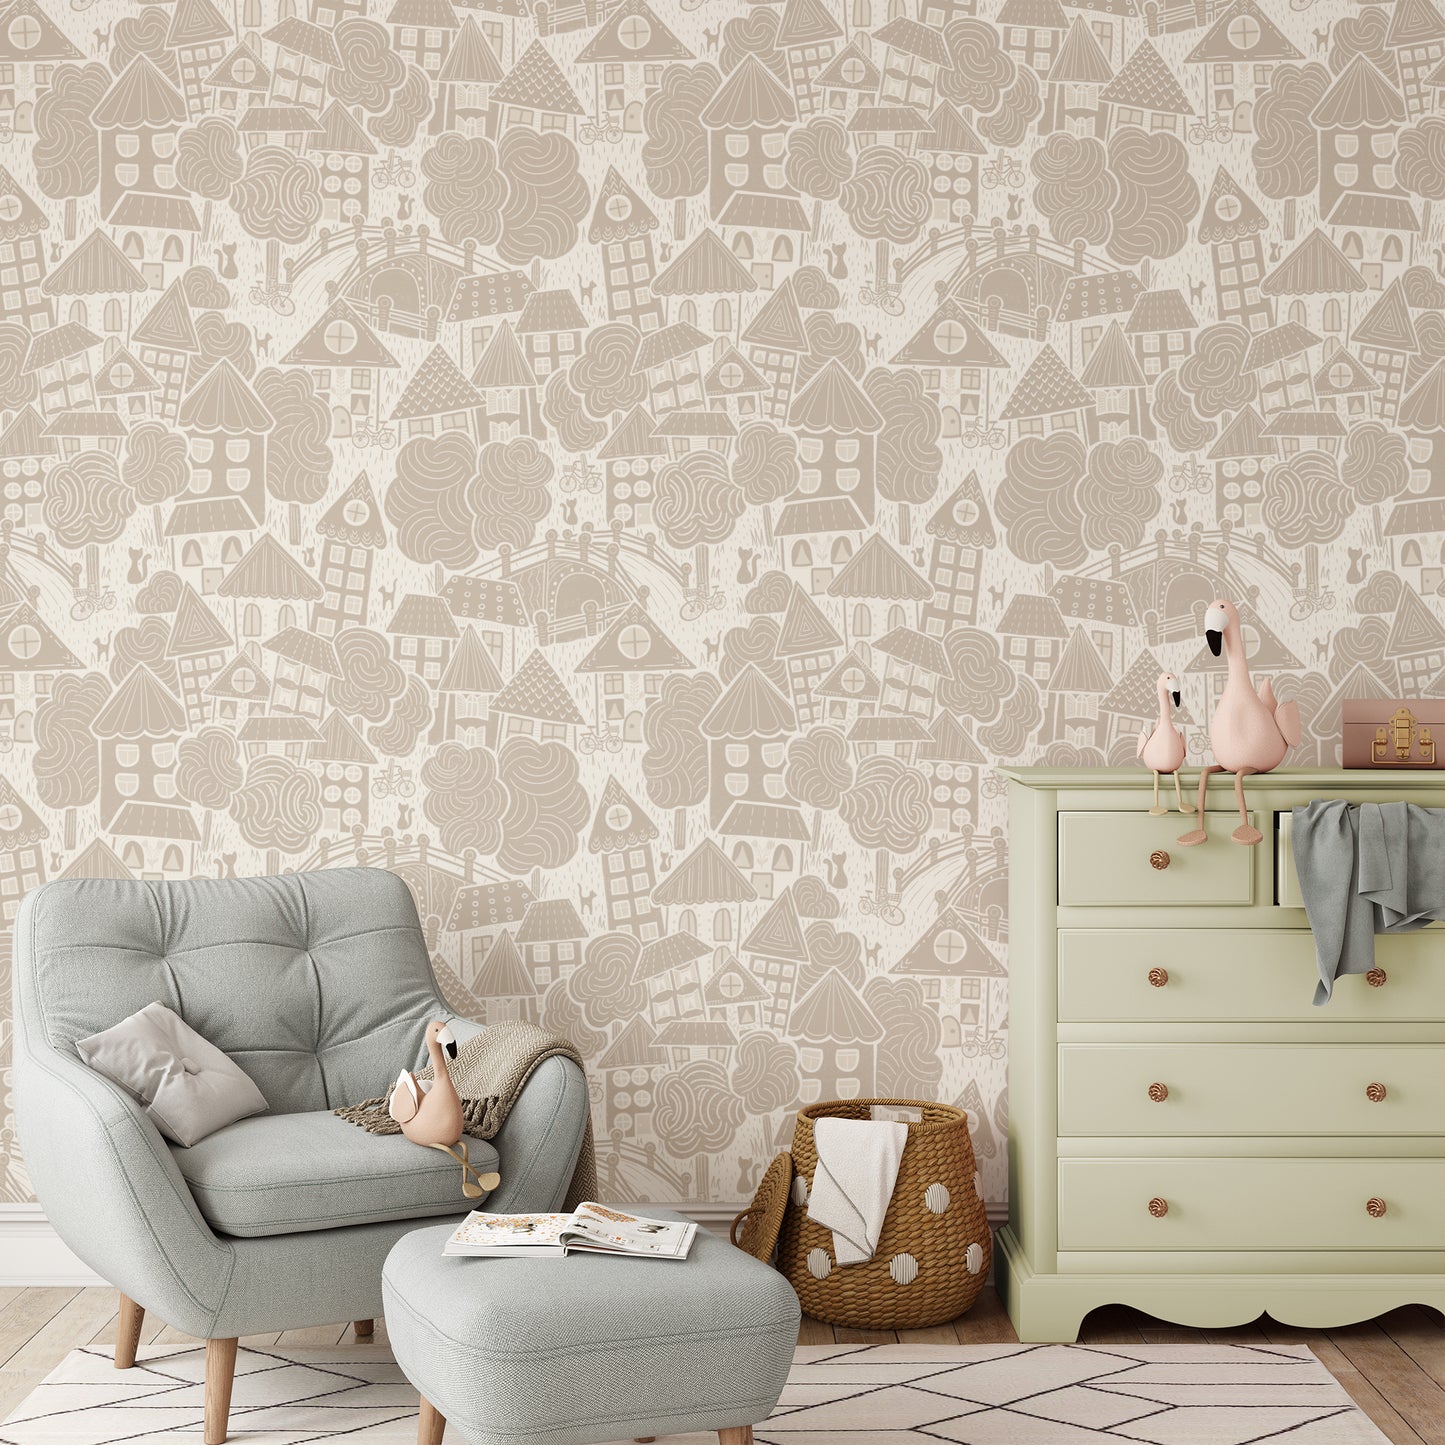 Houses Wallpaper in Taupe shown in a nursery.